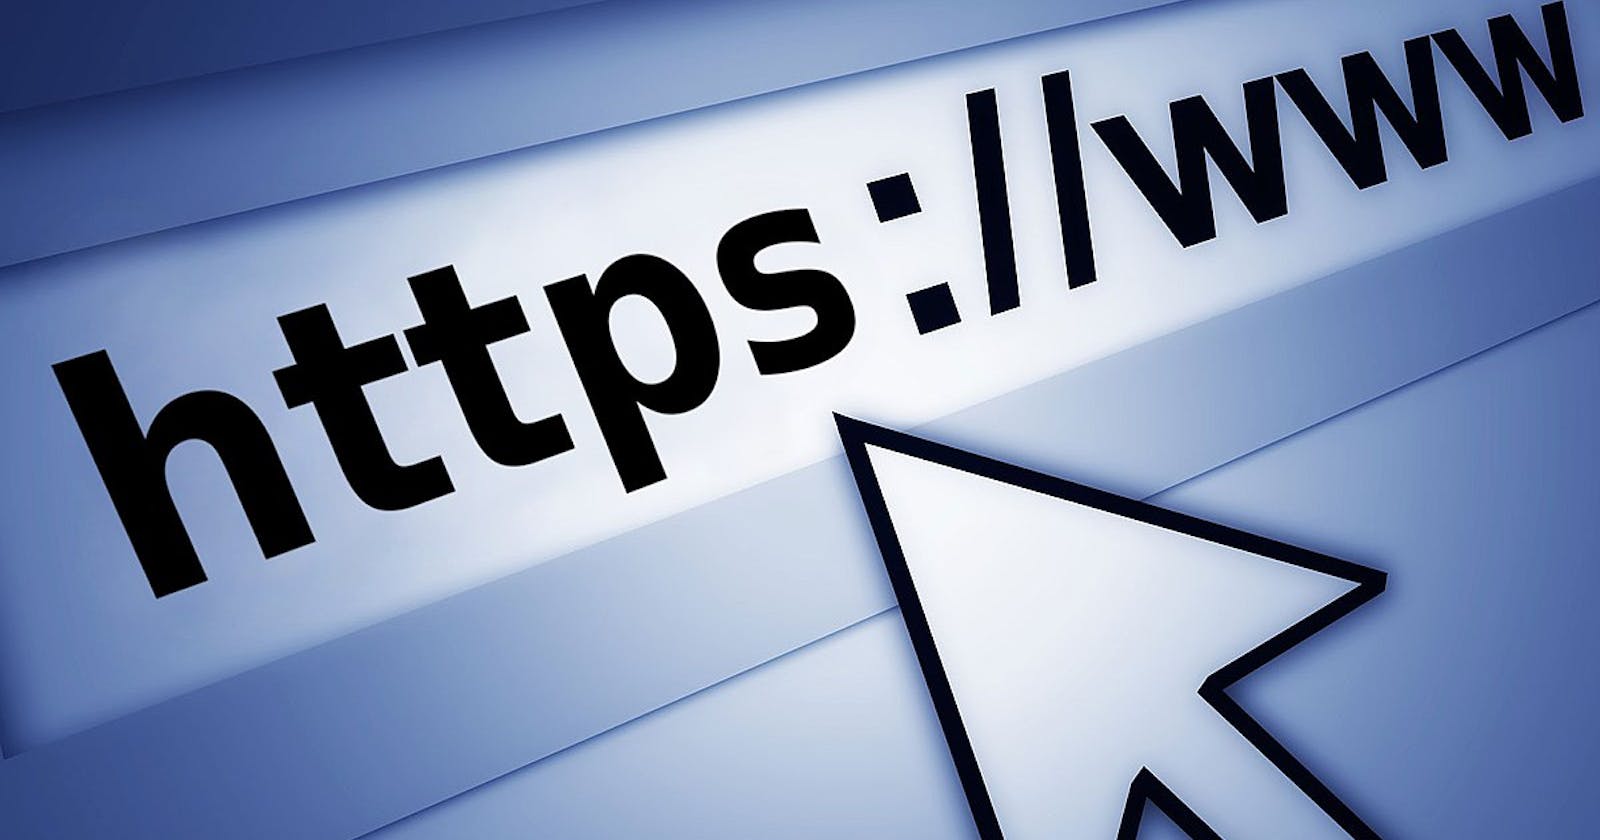 The HTTP vs HTTPS Showdown: Why Using HTTPS Keeps Your Web Browsing Secure